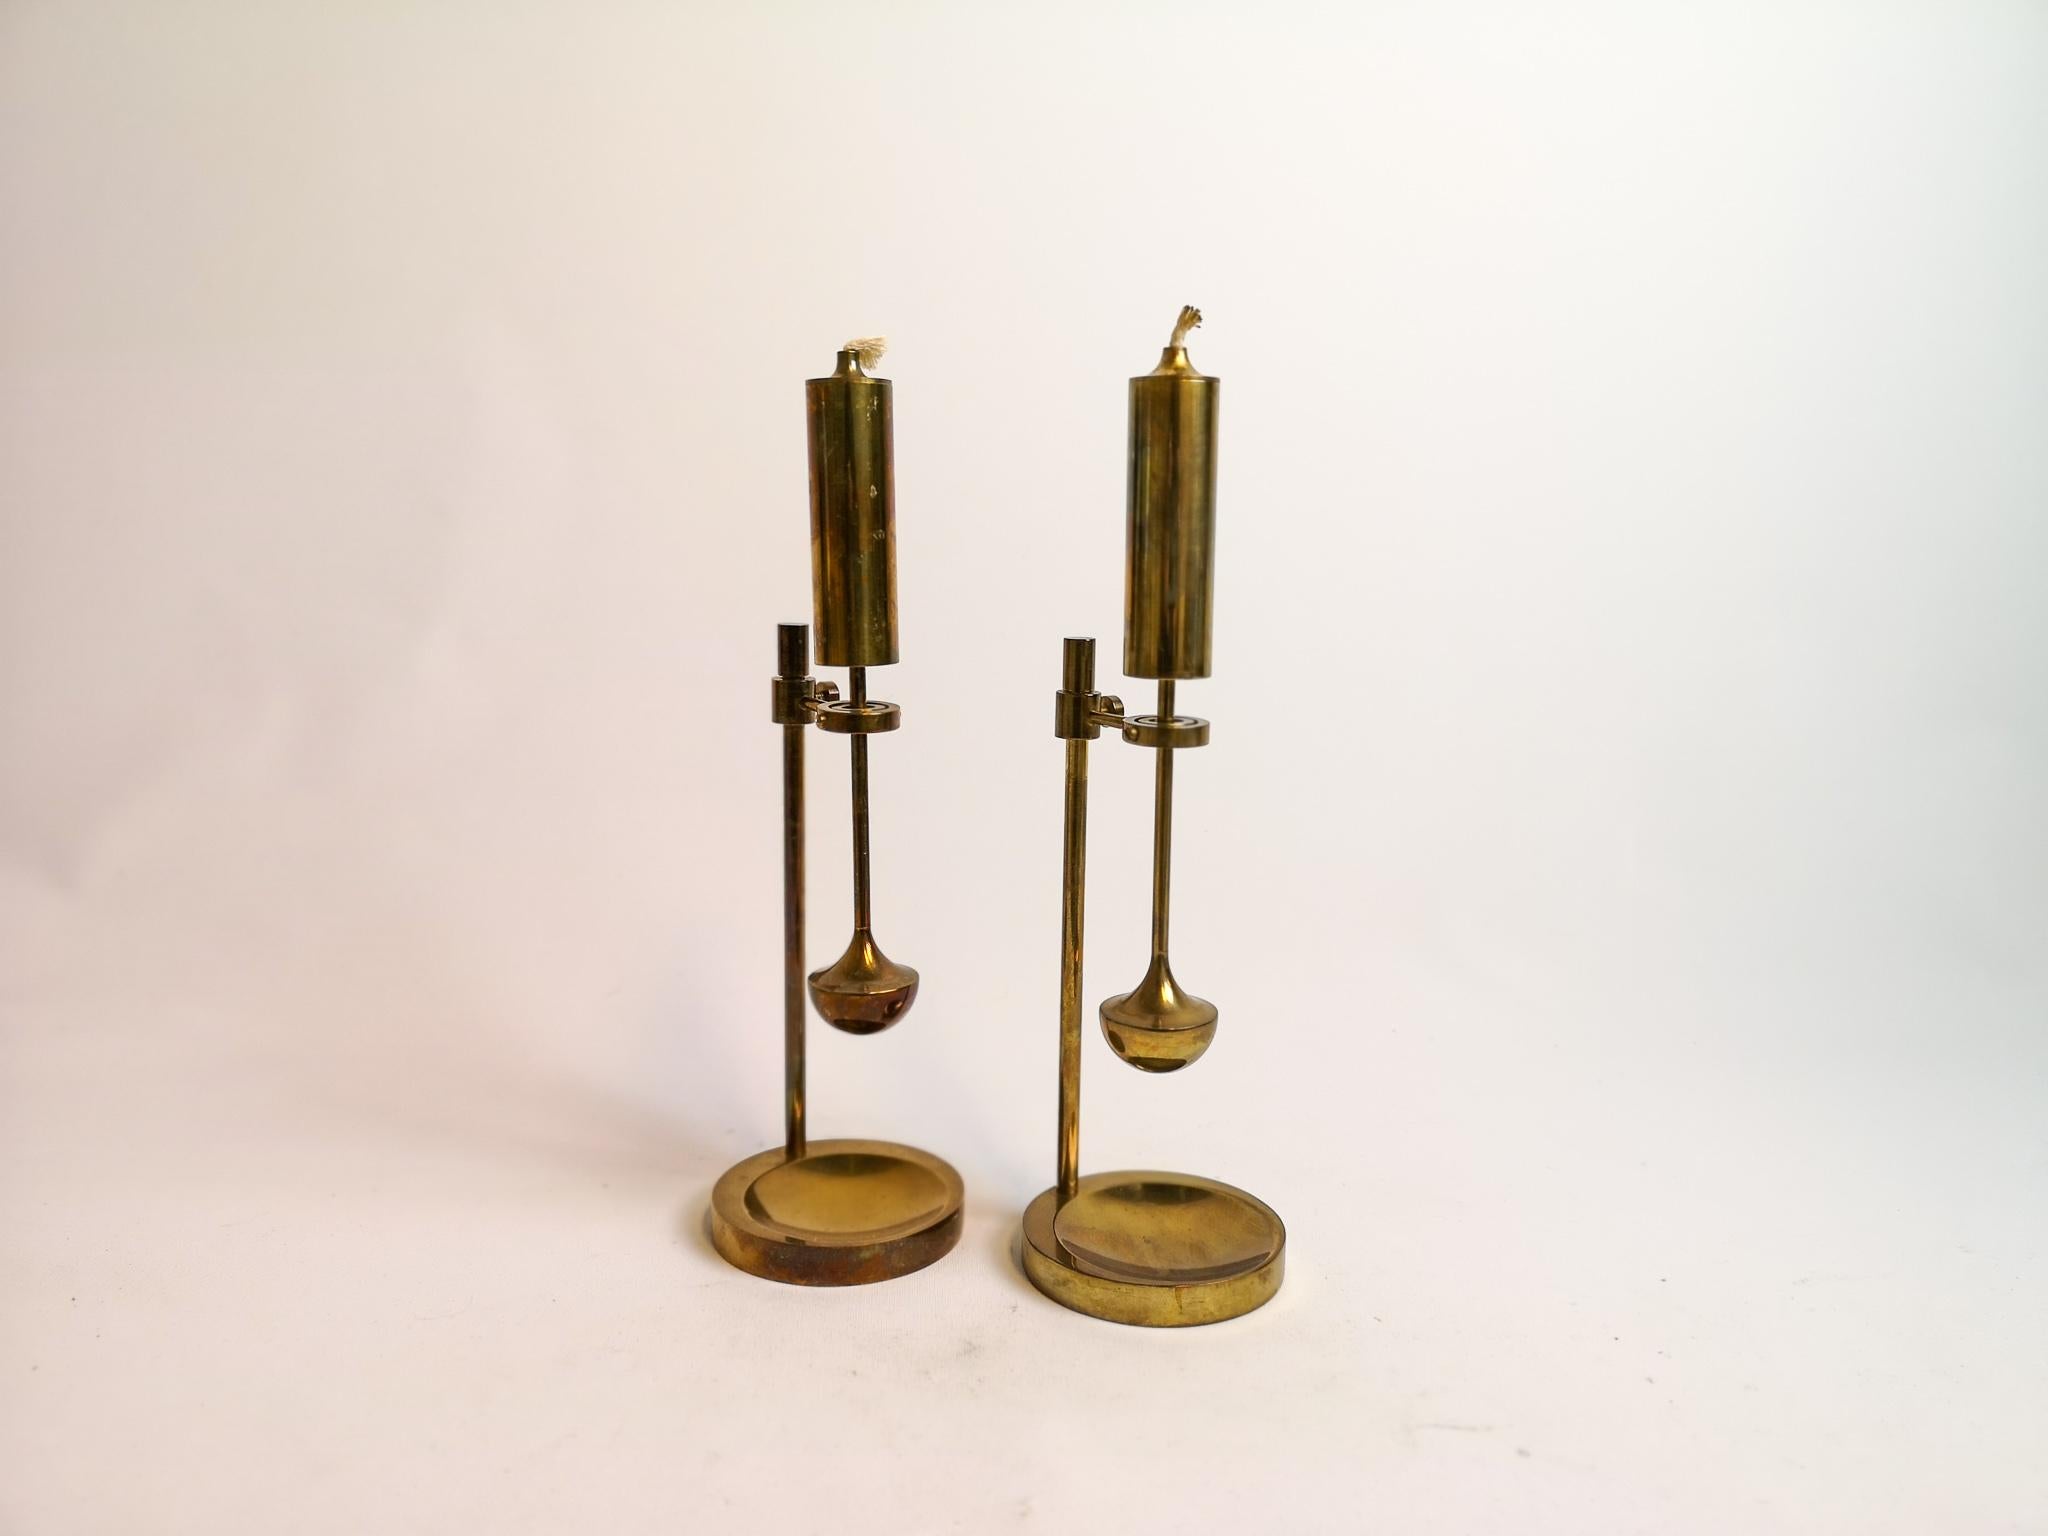 This pair of midcentury, finely tooled and machined brass gyroscope oil lamp. Having adjustable height and a gyroscopic leveling device to kept at sea level.
Labeled and stamped on the bottom Ammonsen, Daproma design, handmade, Demark.